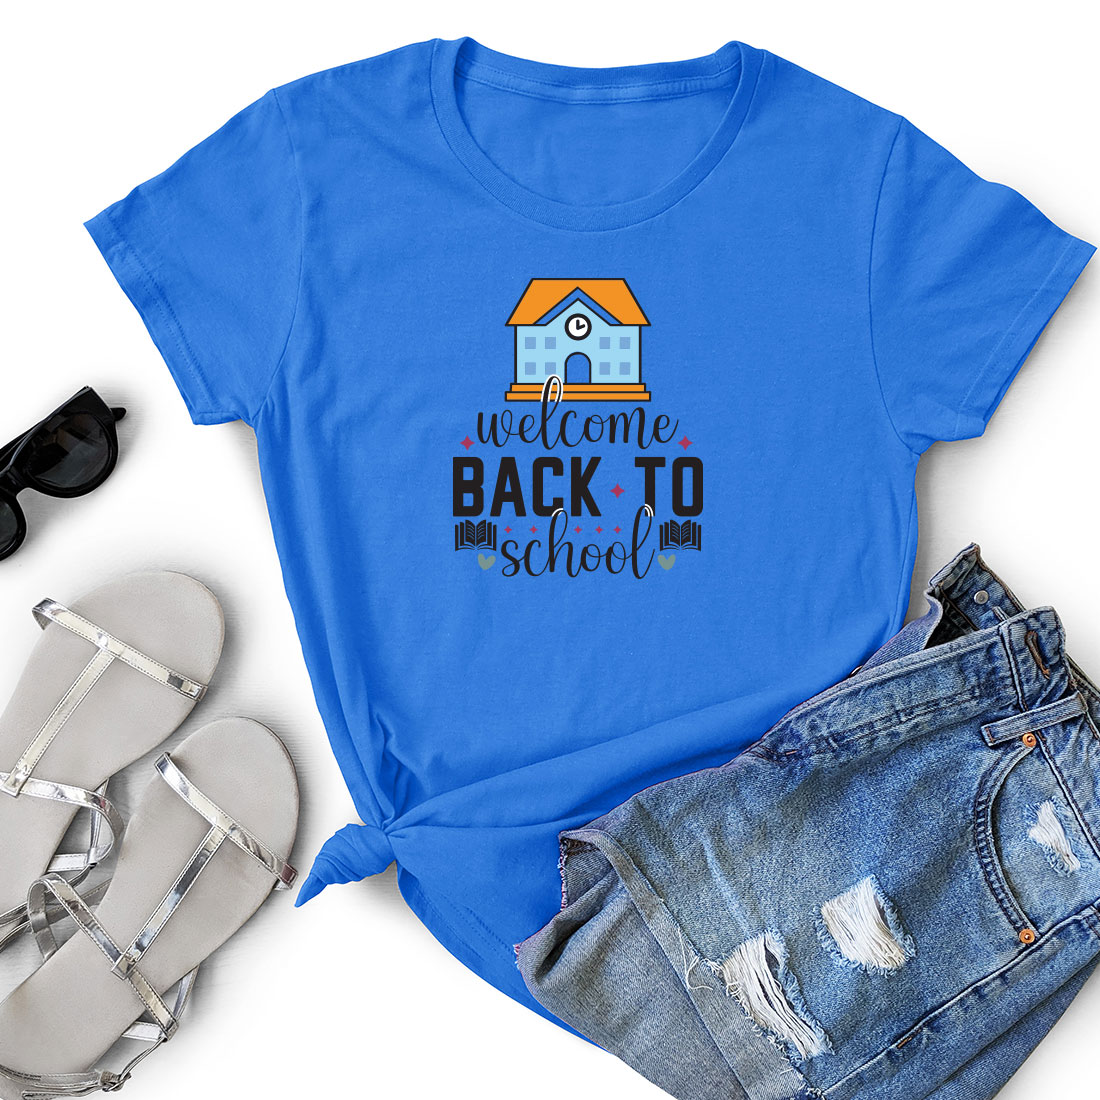 T - shirt that says welcome back to school.